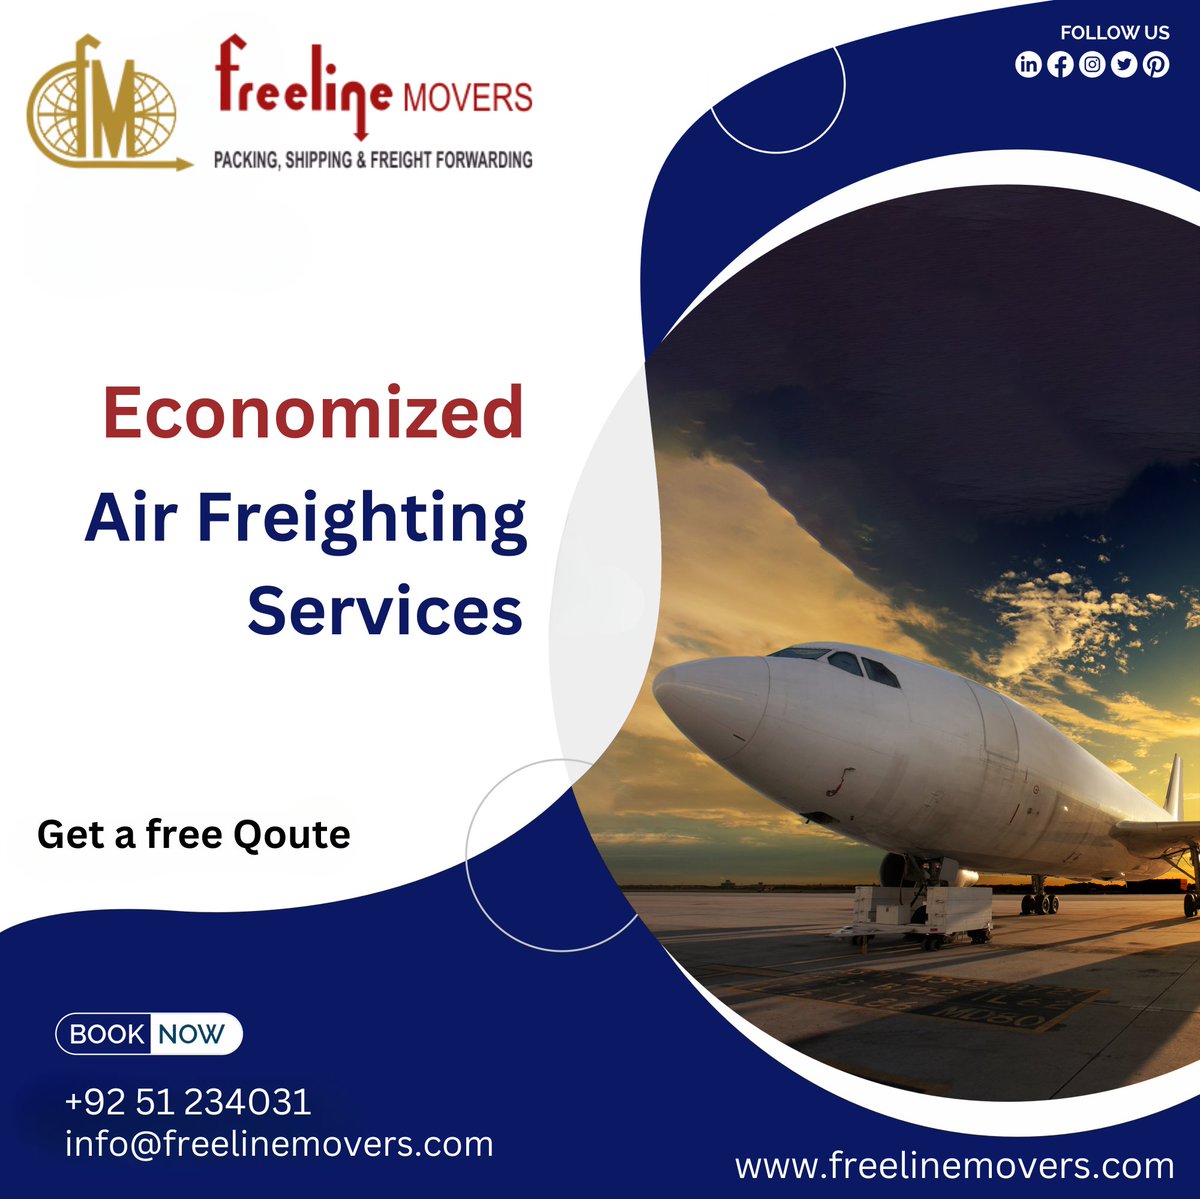 #packing #shipping #shippingworldwide #freight #freightforwarding #freightforwarder #sealife #airfreight #Movers #packing #freelinemovers #Relocation #petrelocation #OfficeRemovals #finearthandling #customclearance #projectmanagementt #LandAirSea #warehouse #doortodoor